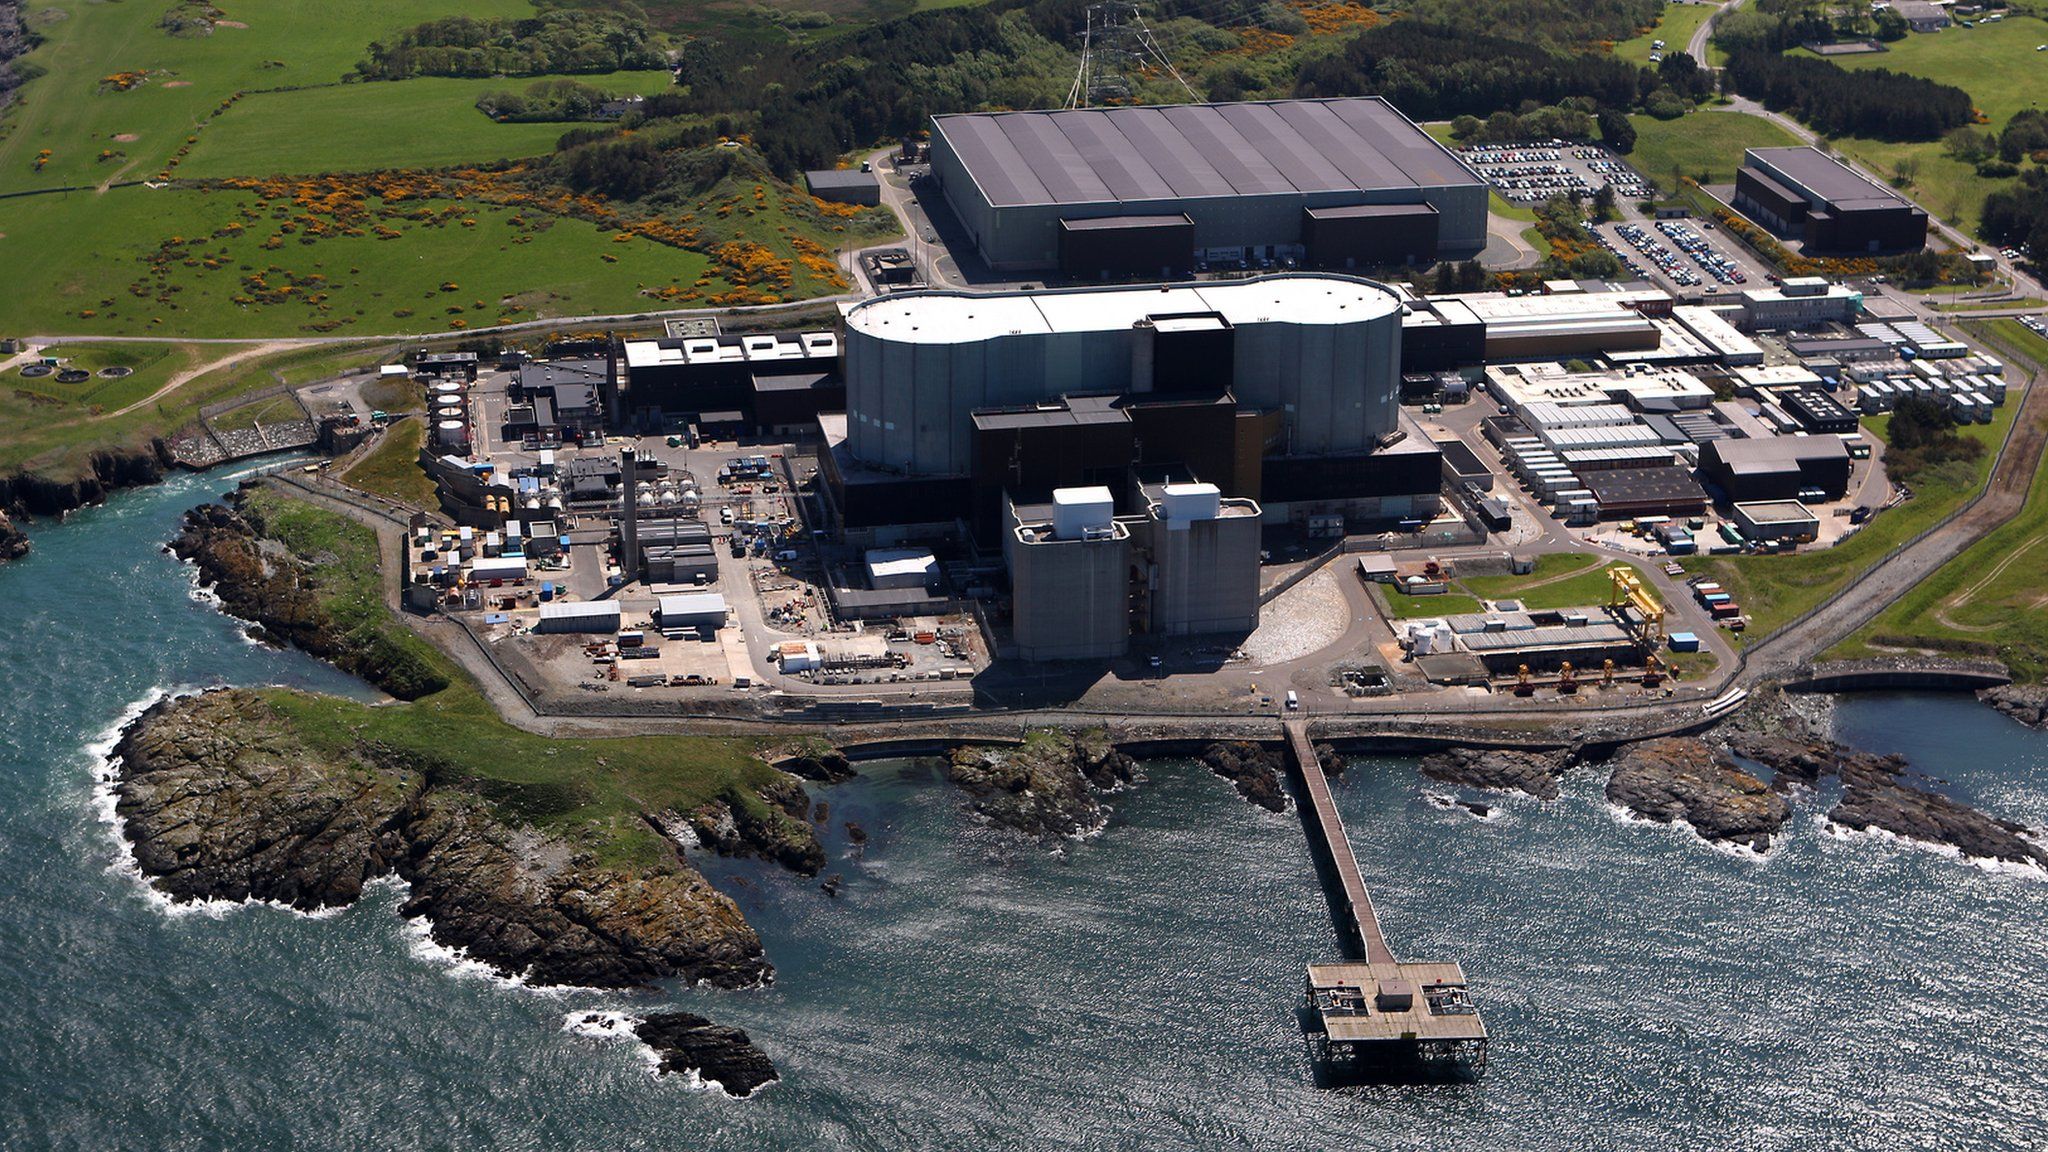 Wylfa from the air